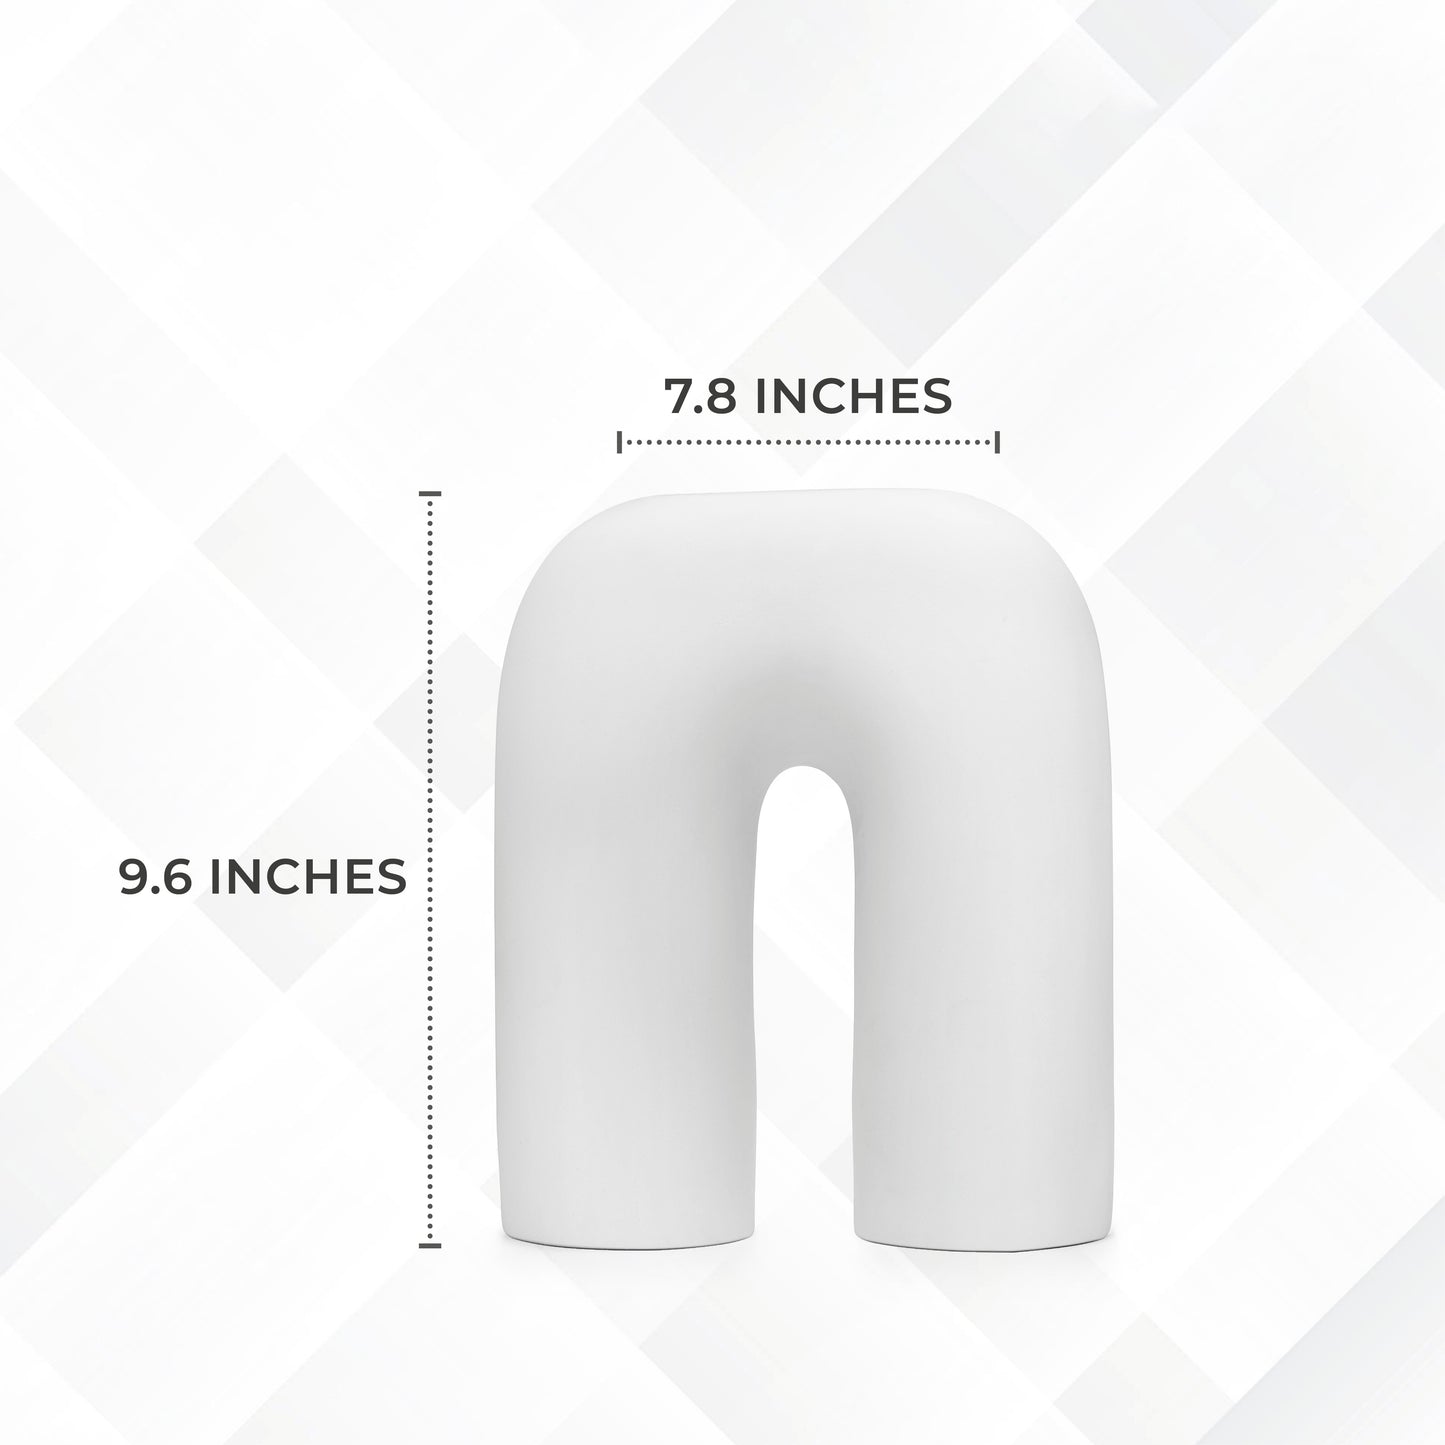 LuxeLane 'U Vase' for Home Decor - White Gloss, 11 inches, Pack of 1